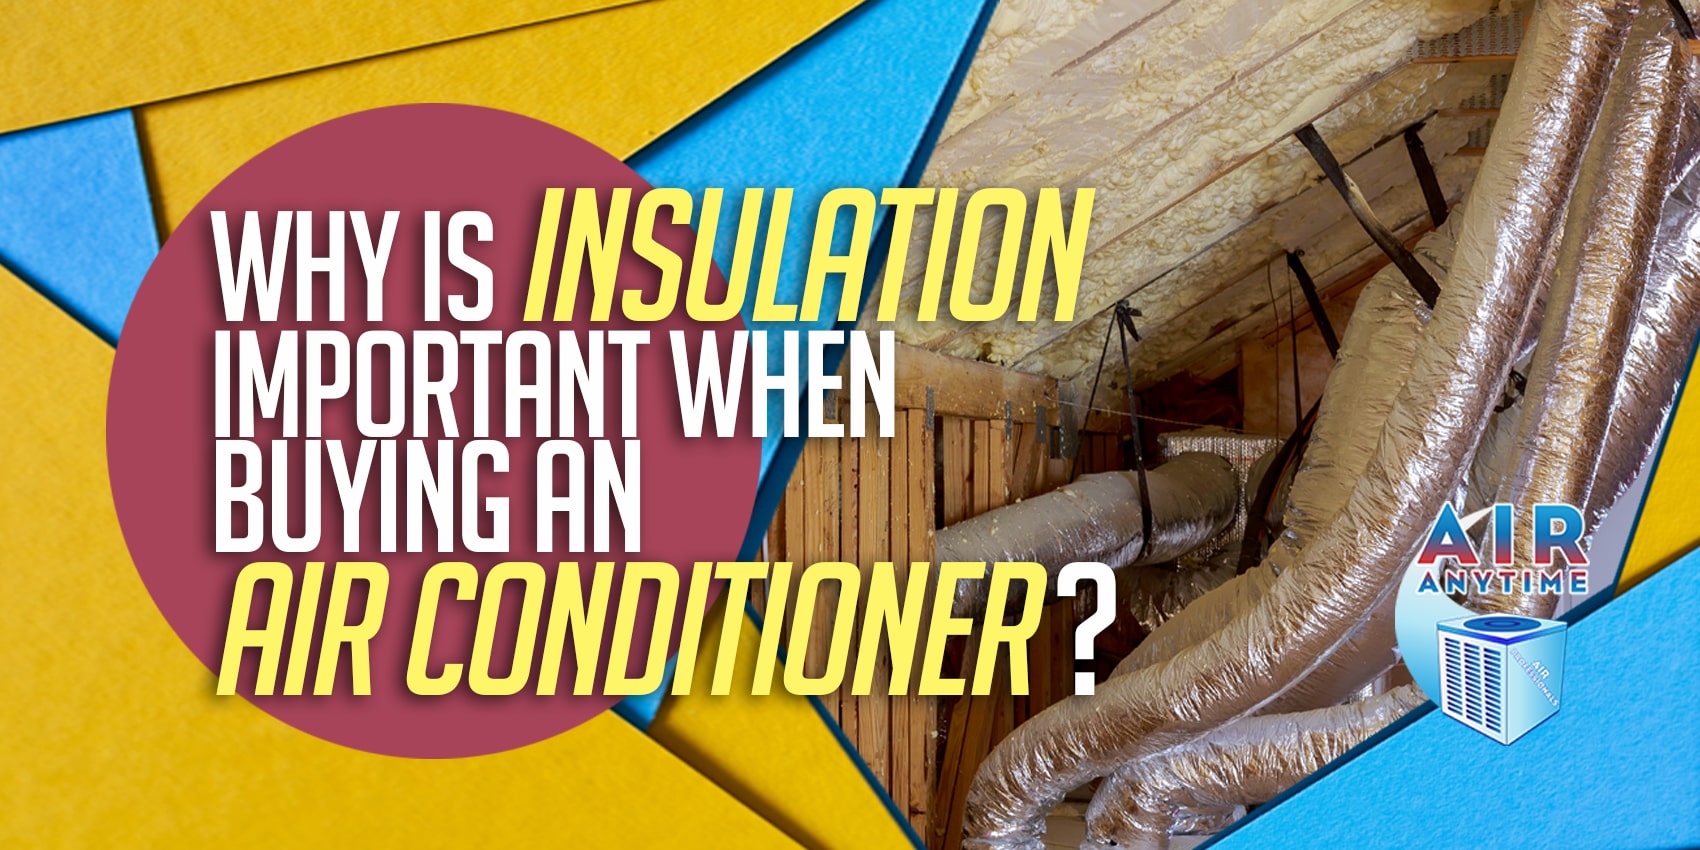 Why Is Insulation Important When Buying an Air Conditioner?